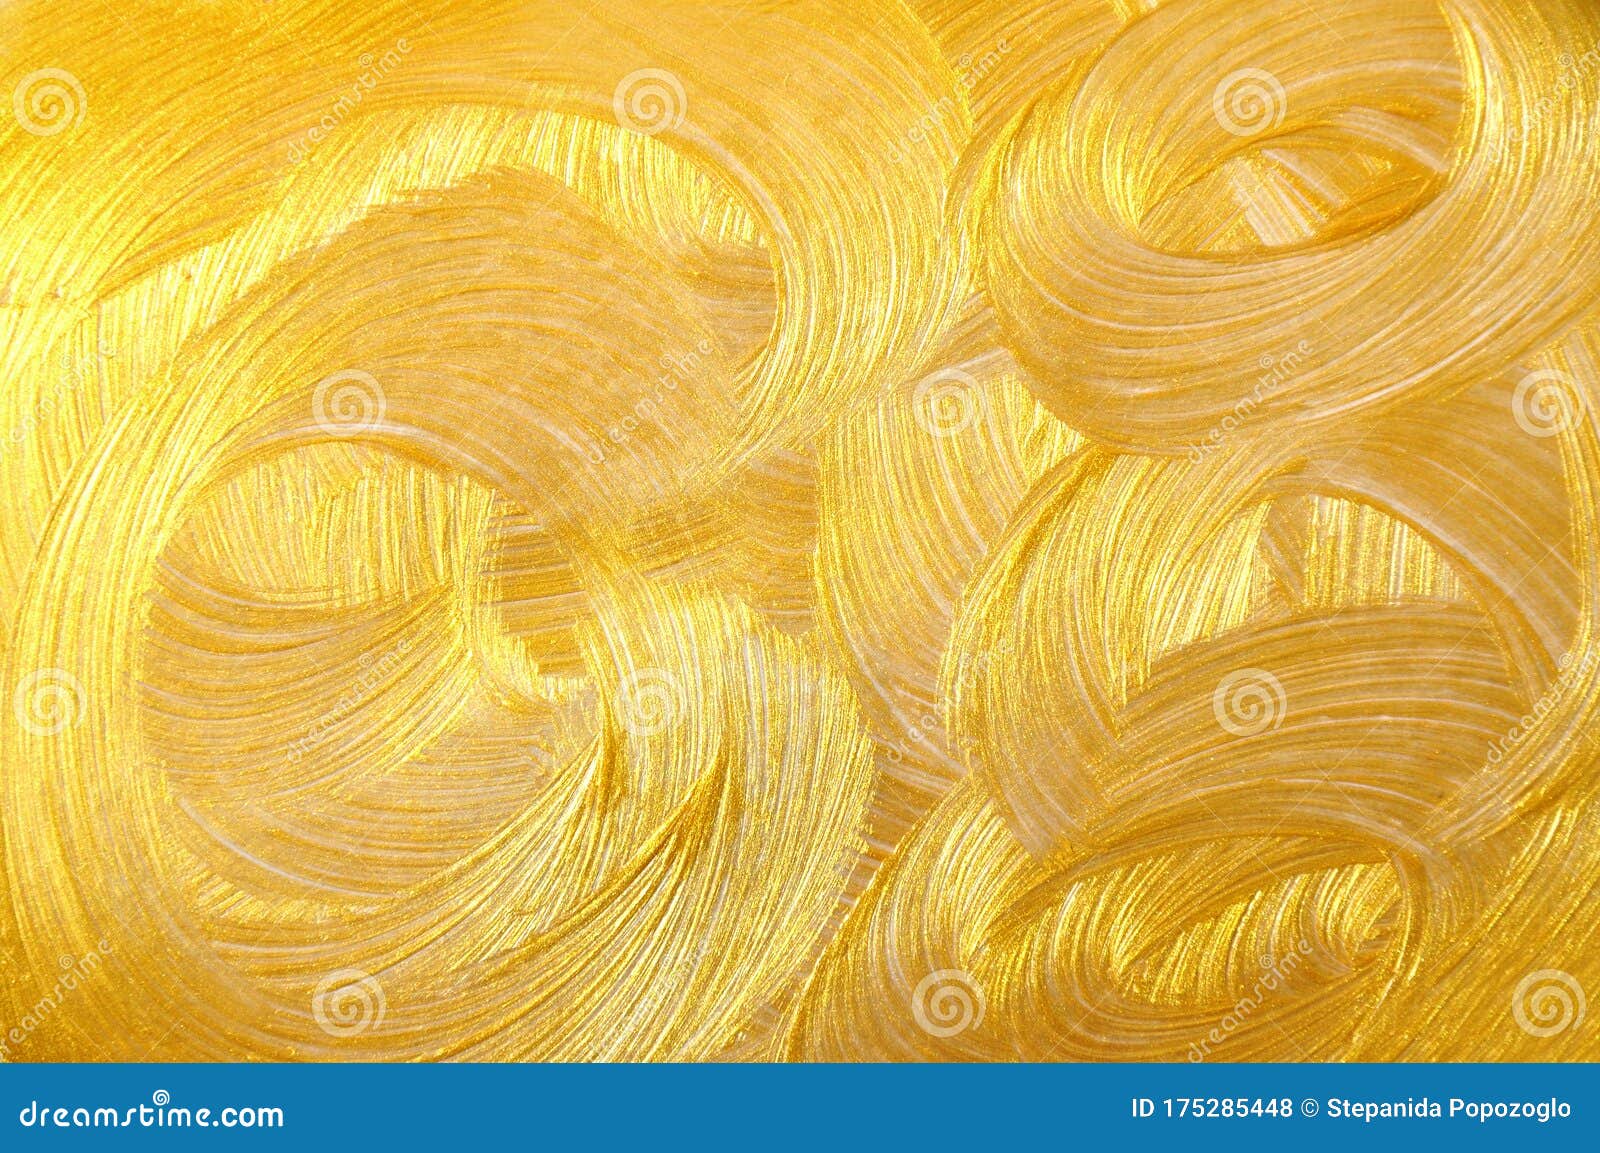 Golden Paint Brush Stroke Texture Background Shiny Abstract Grunge Textured Gold Brush Stains Design Elements Stock Photo Image Of Glitter Drawing